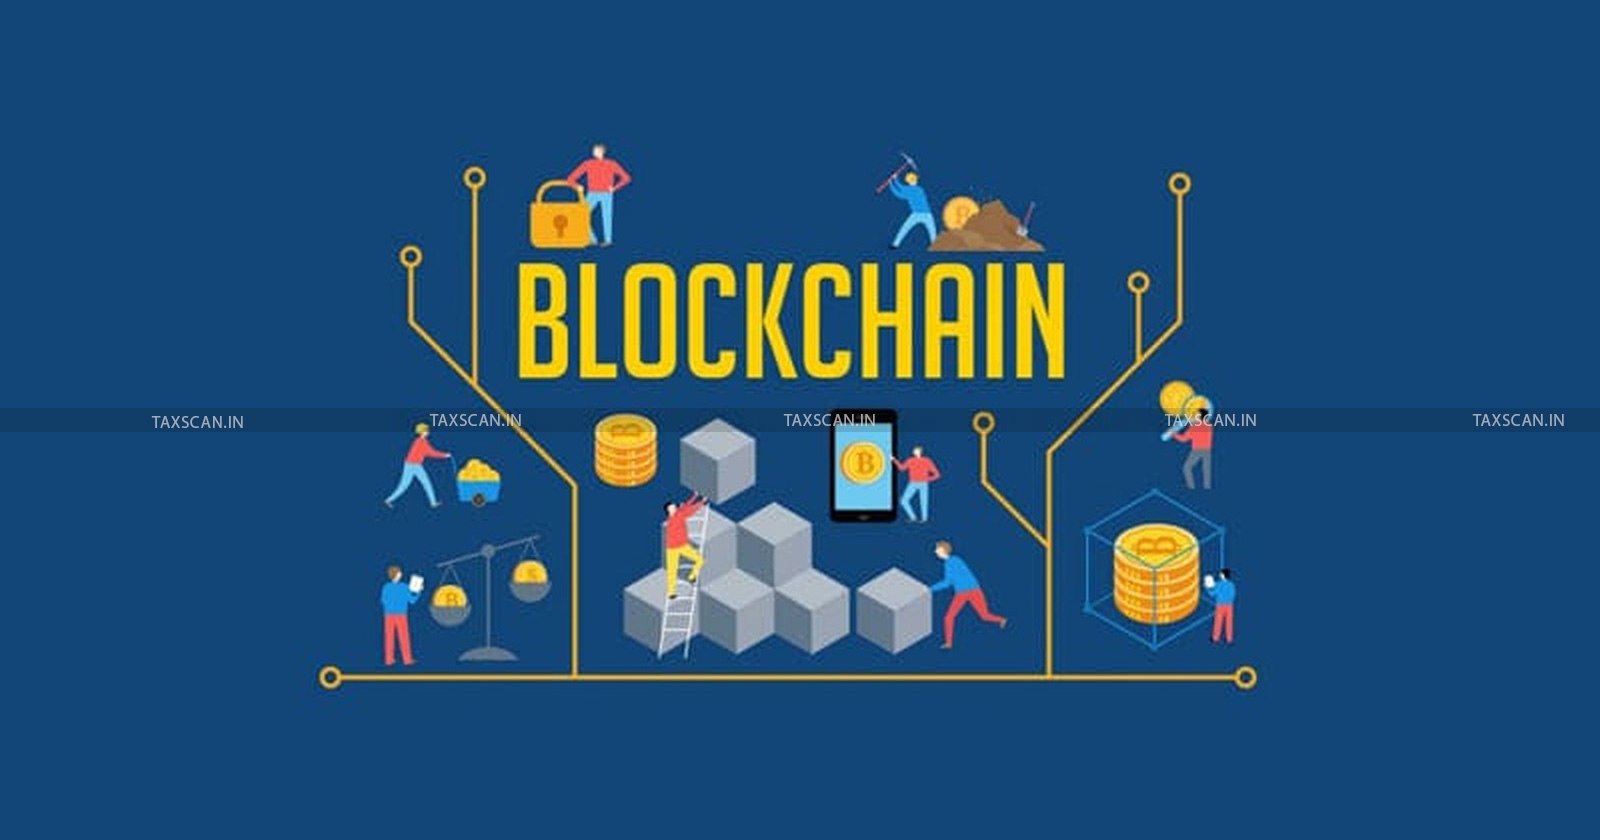 Block Chain Technology - Block Chain - Technology - Toolkit for Chartered Accountants - Chartered Accountants - Toolkit - Future Toolkit - Blockchain - taxscan